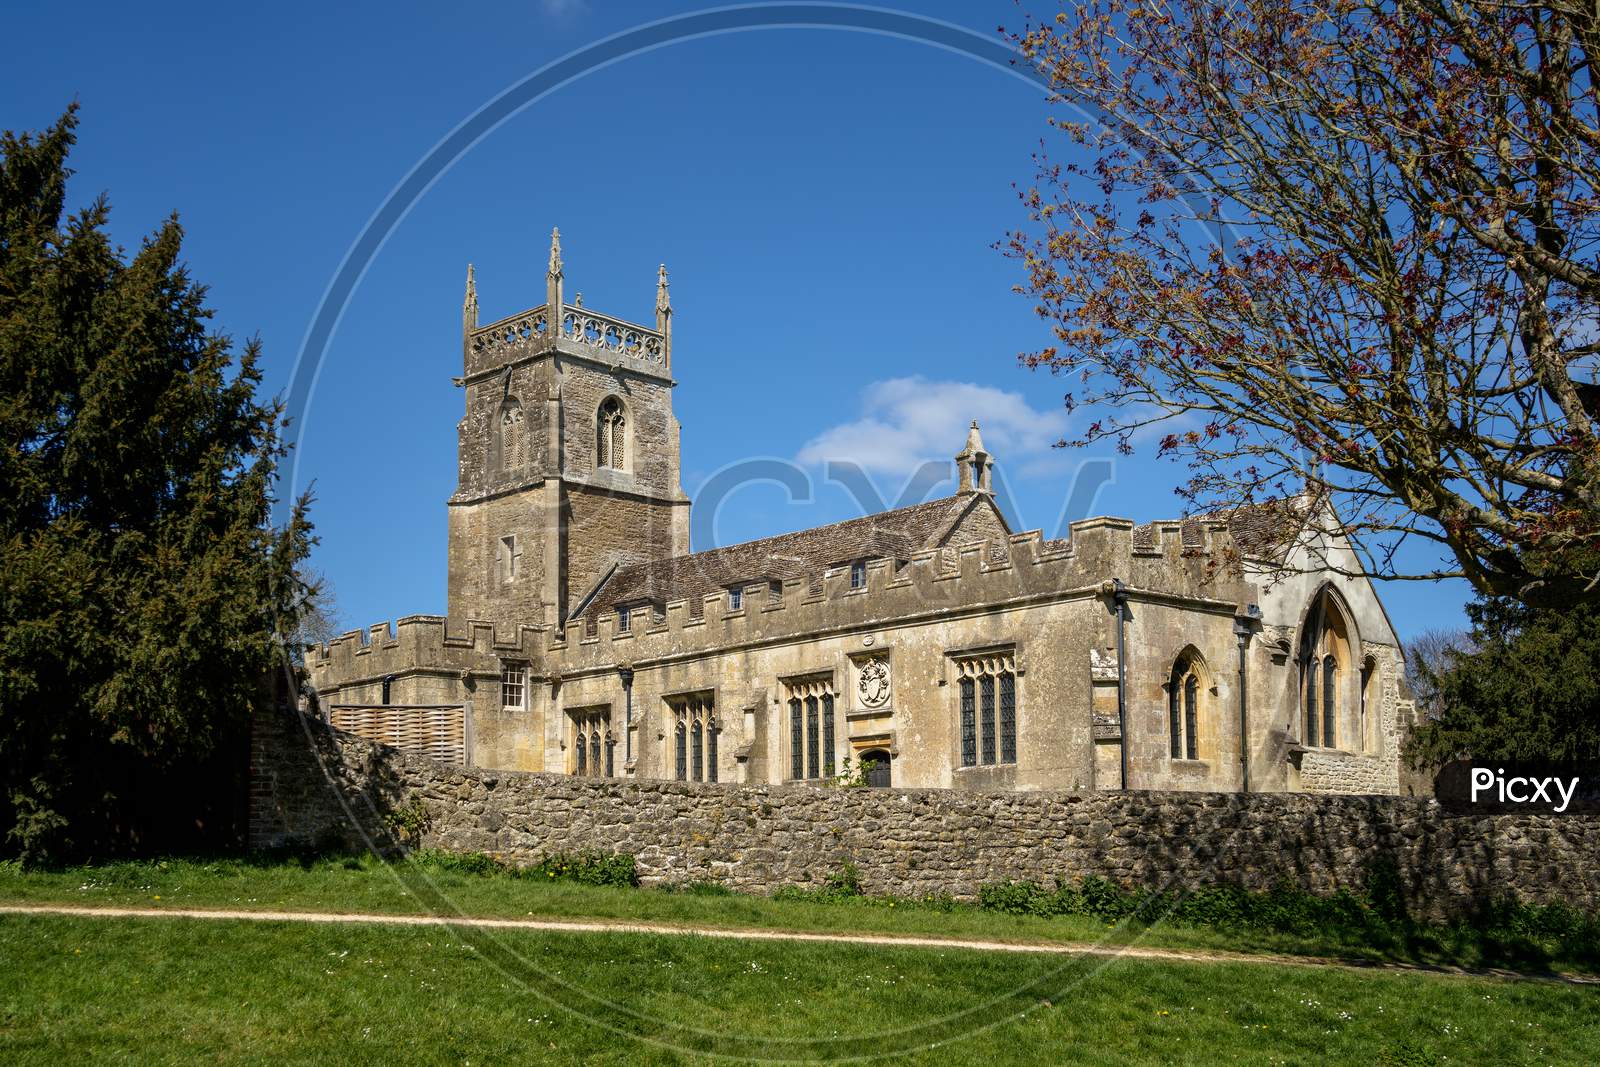 Swindon, Wiltshire, Uk -April 25 : View Of St Marys Church In Lydiard Park Near Swindon Wiltshire On April 25, 2021